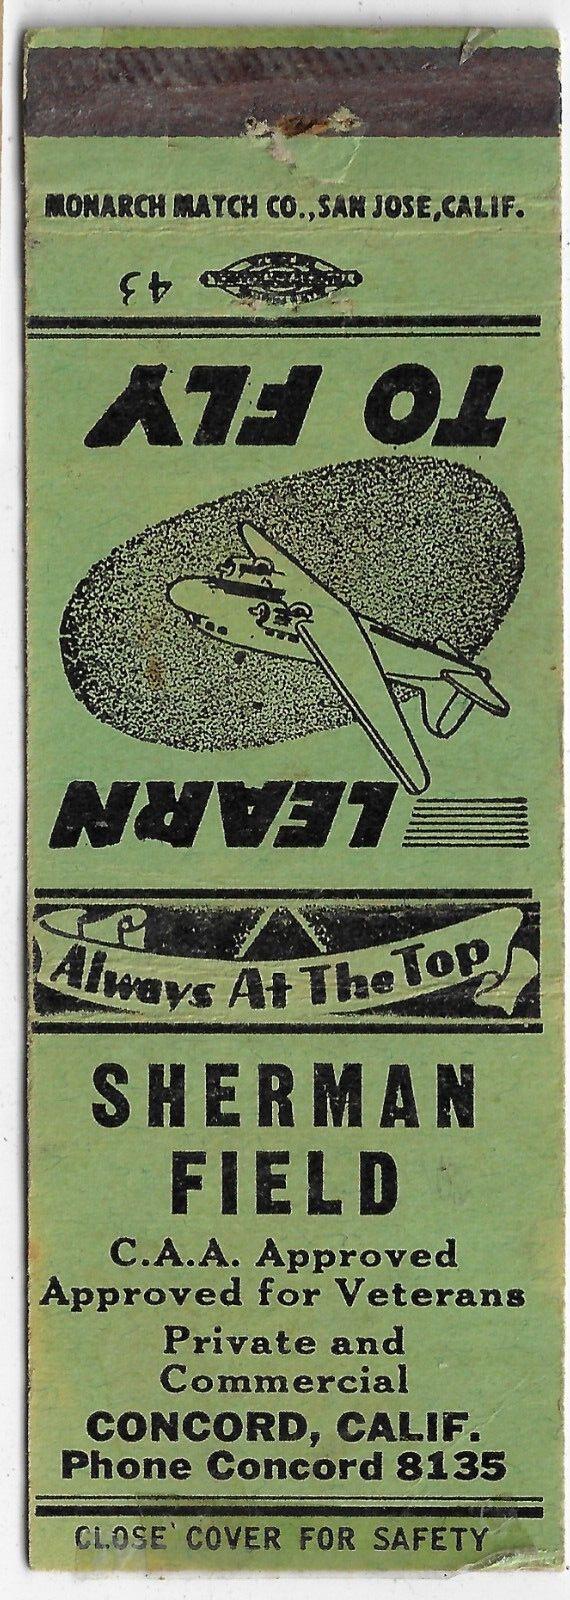 Learn to Fly Sherman Field Concord Calif. FS Empty Matchbook Cover